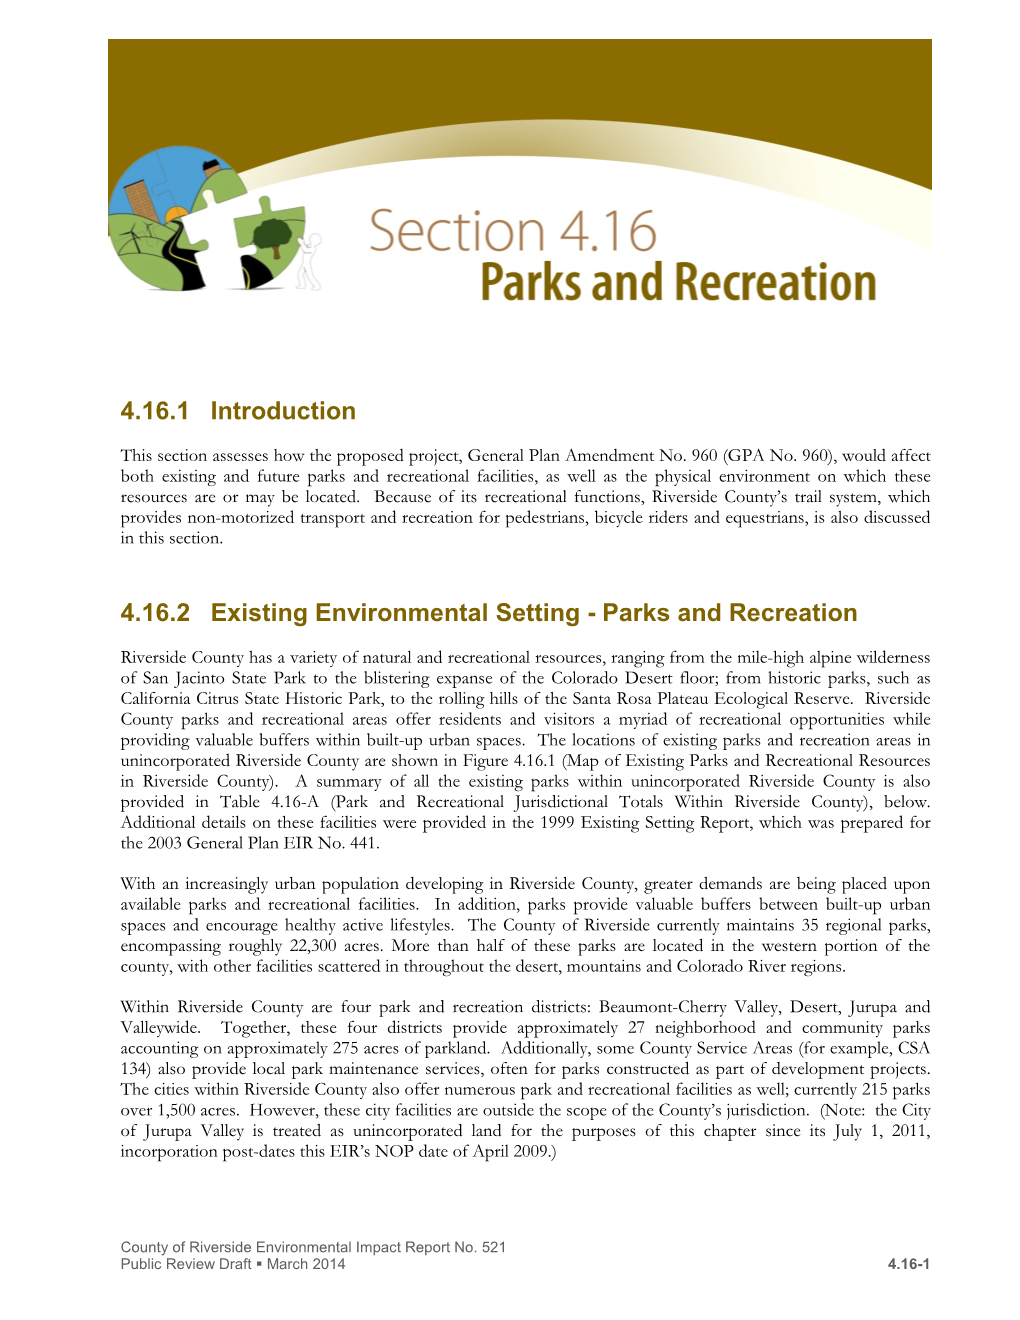 4.16.1 Introduction 4.16.2 Existing Environmental Setting